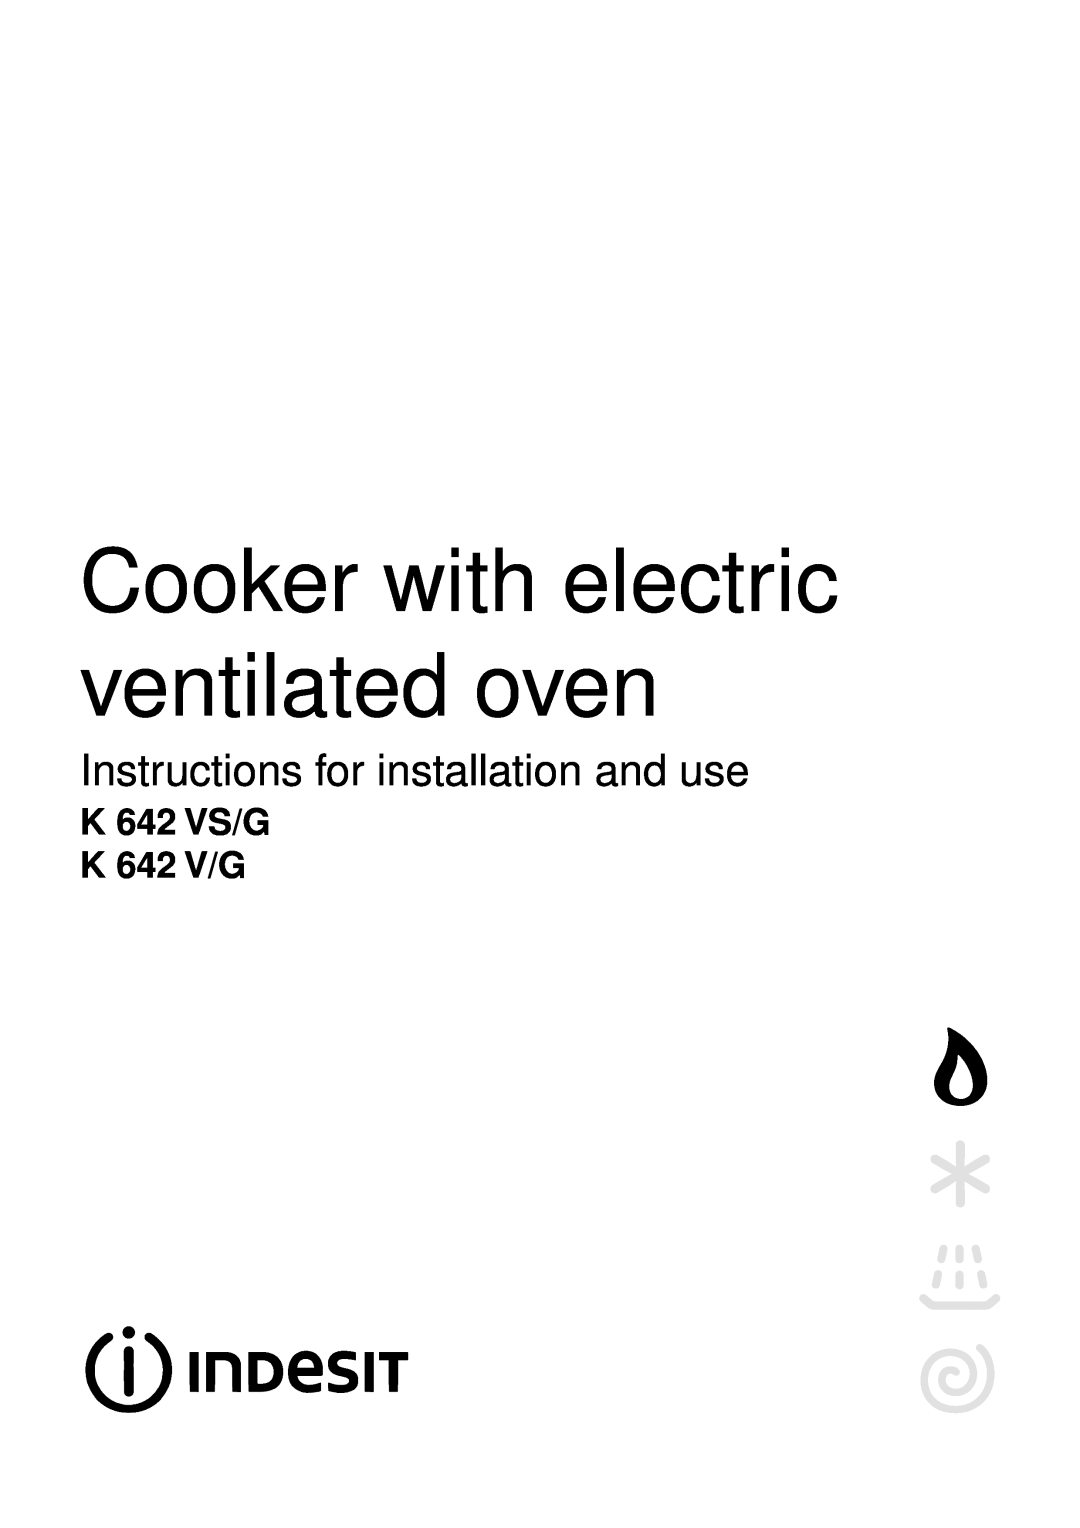 Indesit manual Cooker with electric ventilated oven, Instructions for installation and use, K642 VS/G K 642 V/G 